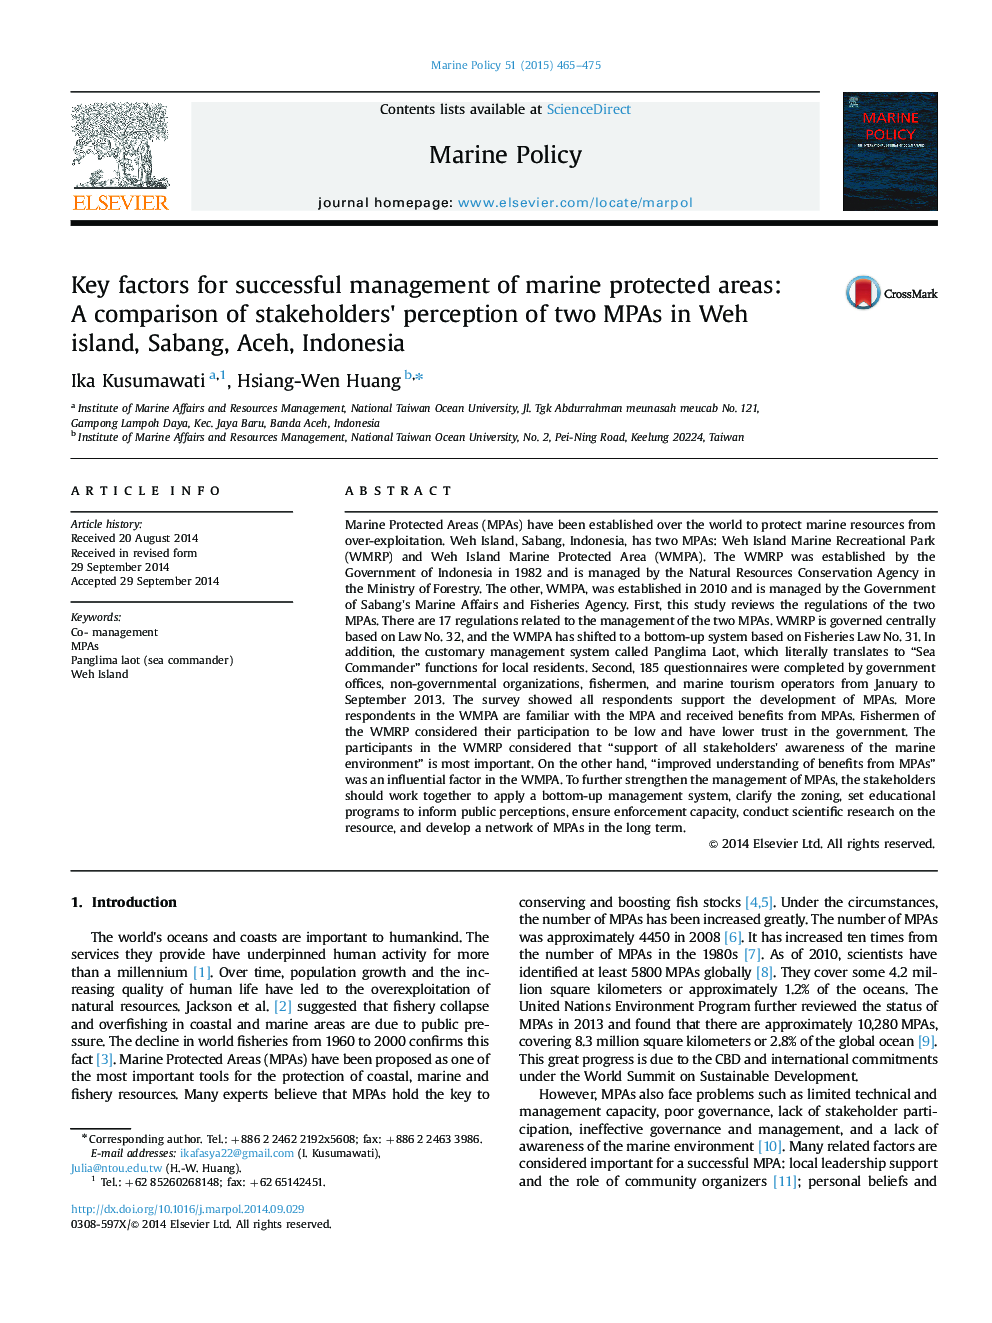 Key factors for successful management of marine protected areas: A comparison of stakeholders×³ perception of two MPAs in Weh island, Sabang, Aceh, Indonesia